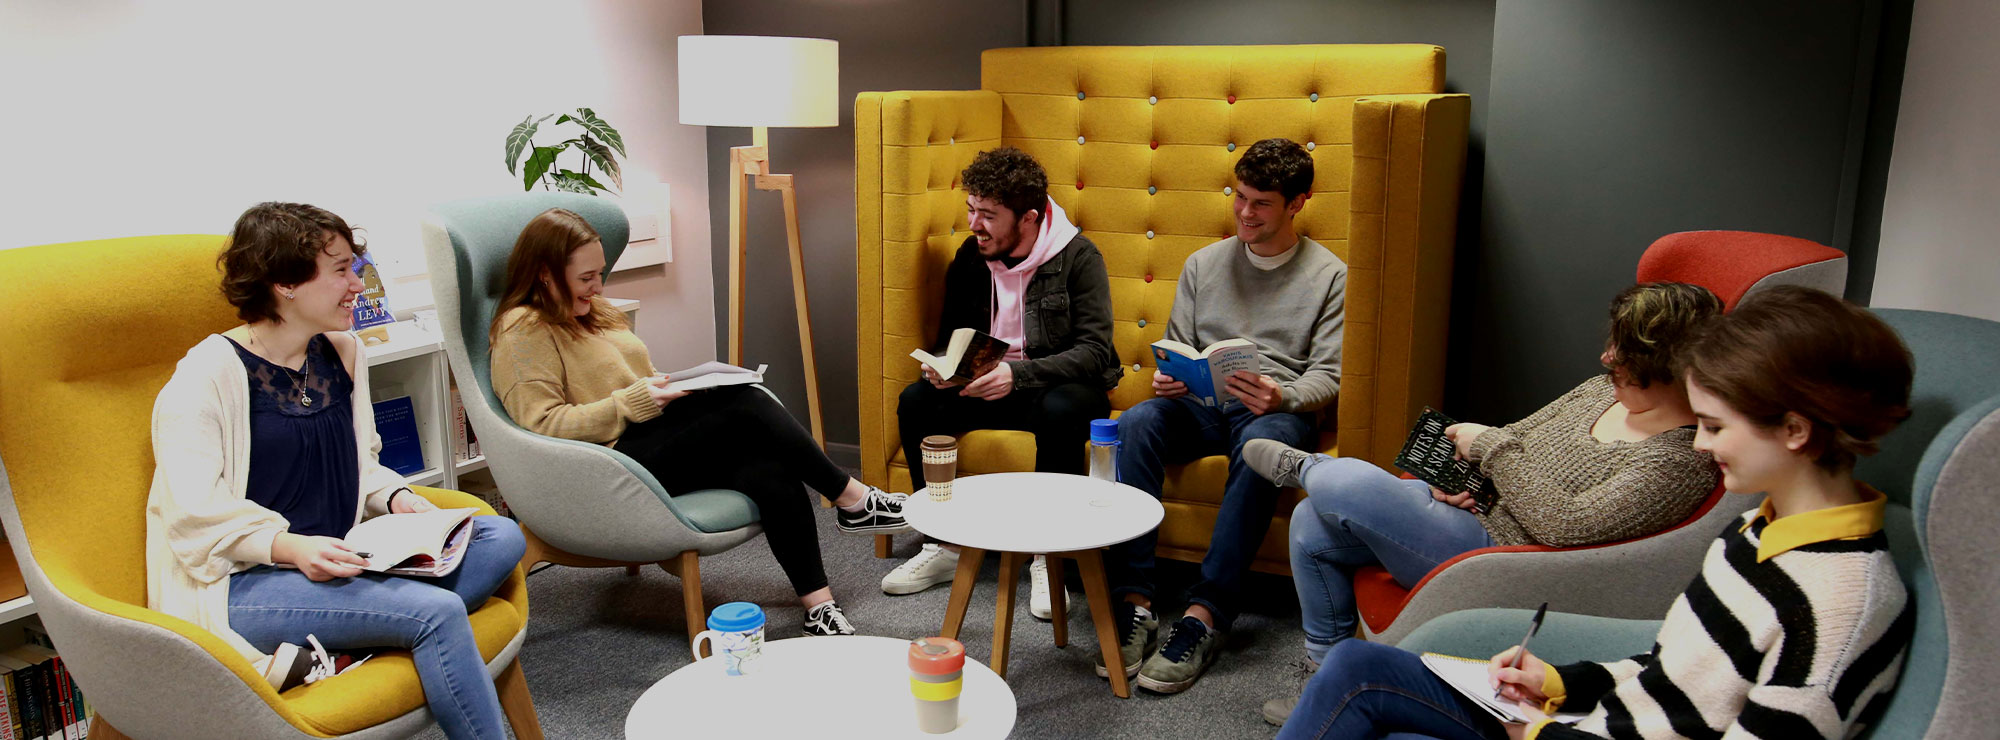 A group of students working together in a study space at Bath Spa